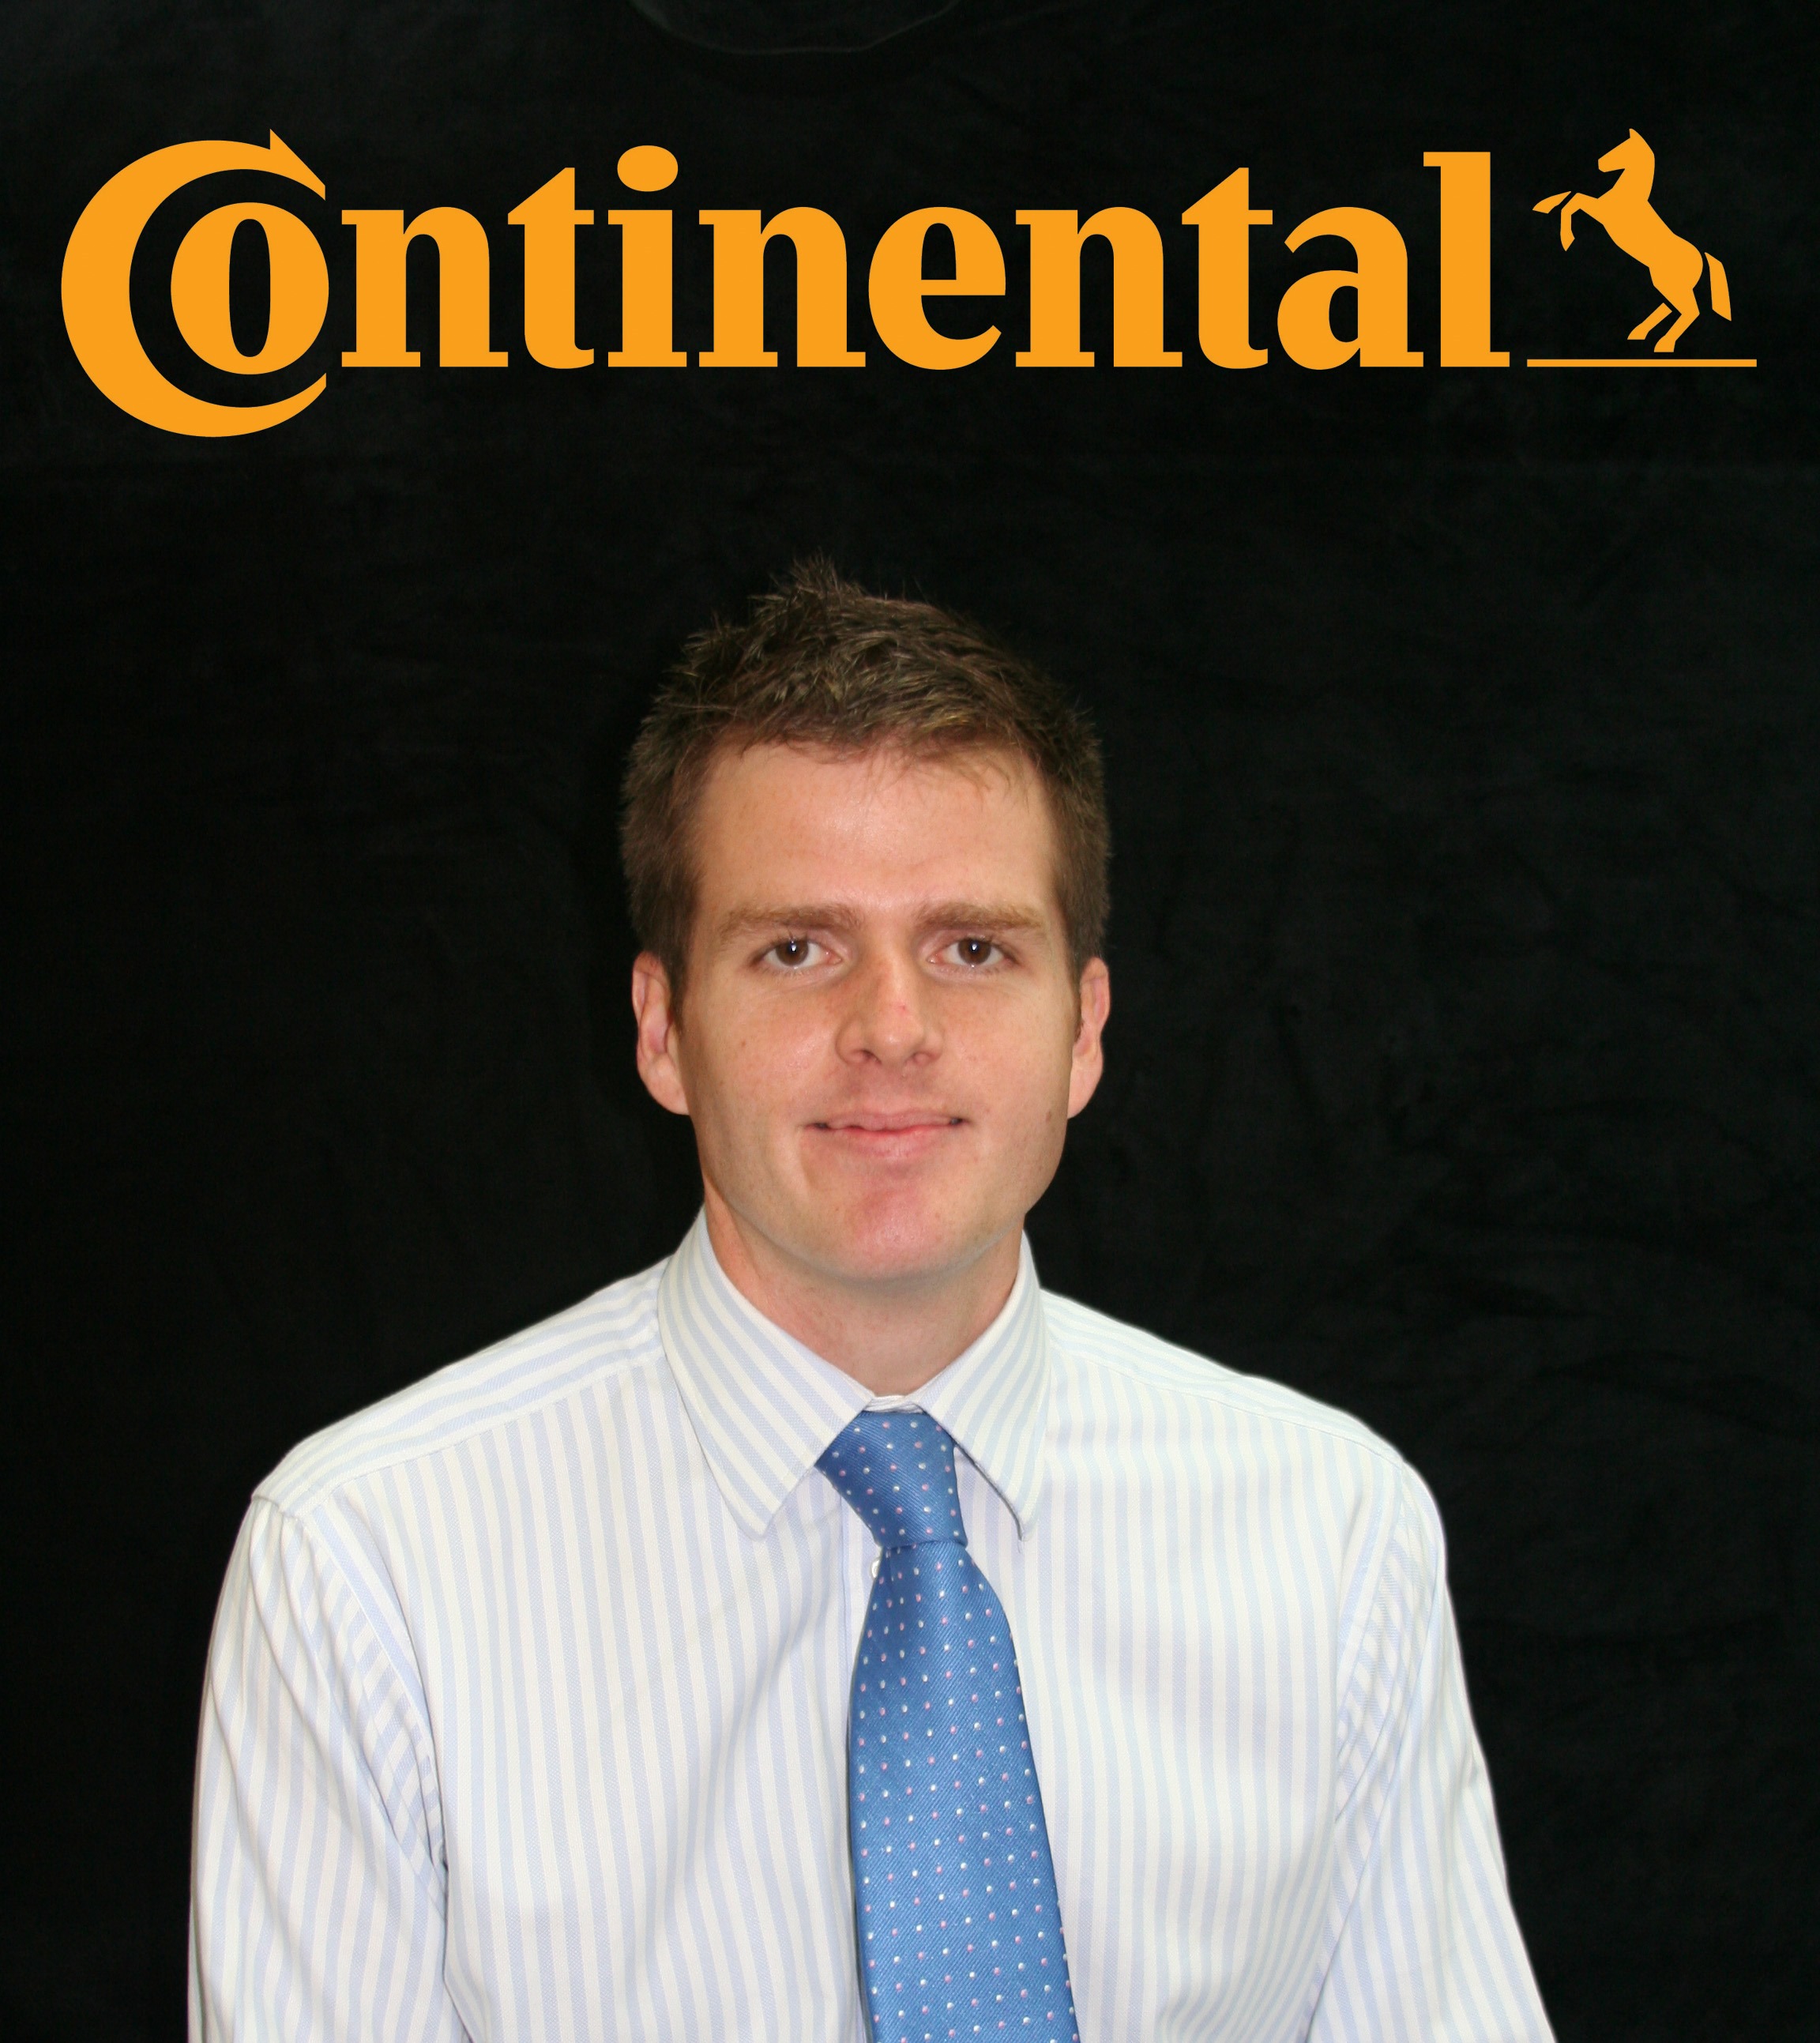 Conti makes 2 UK, Ireland commercial tyre sales, marketing appointments